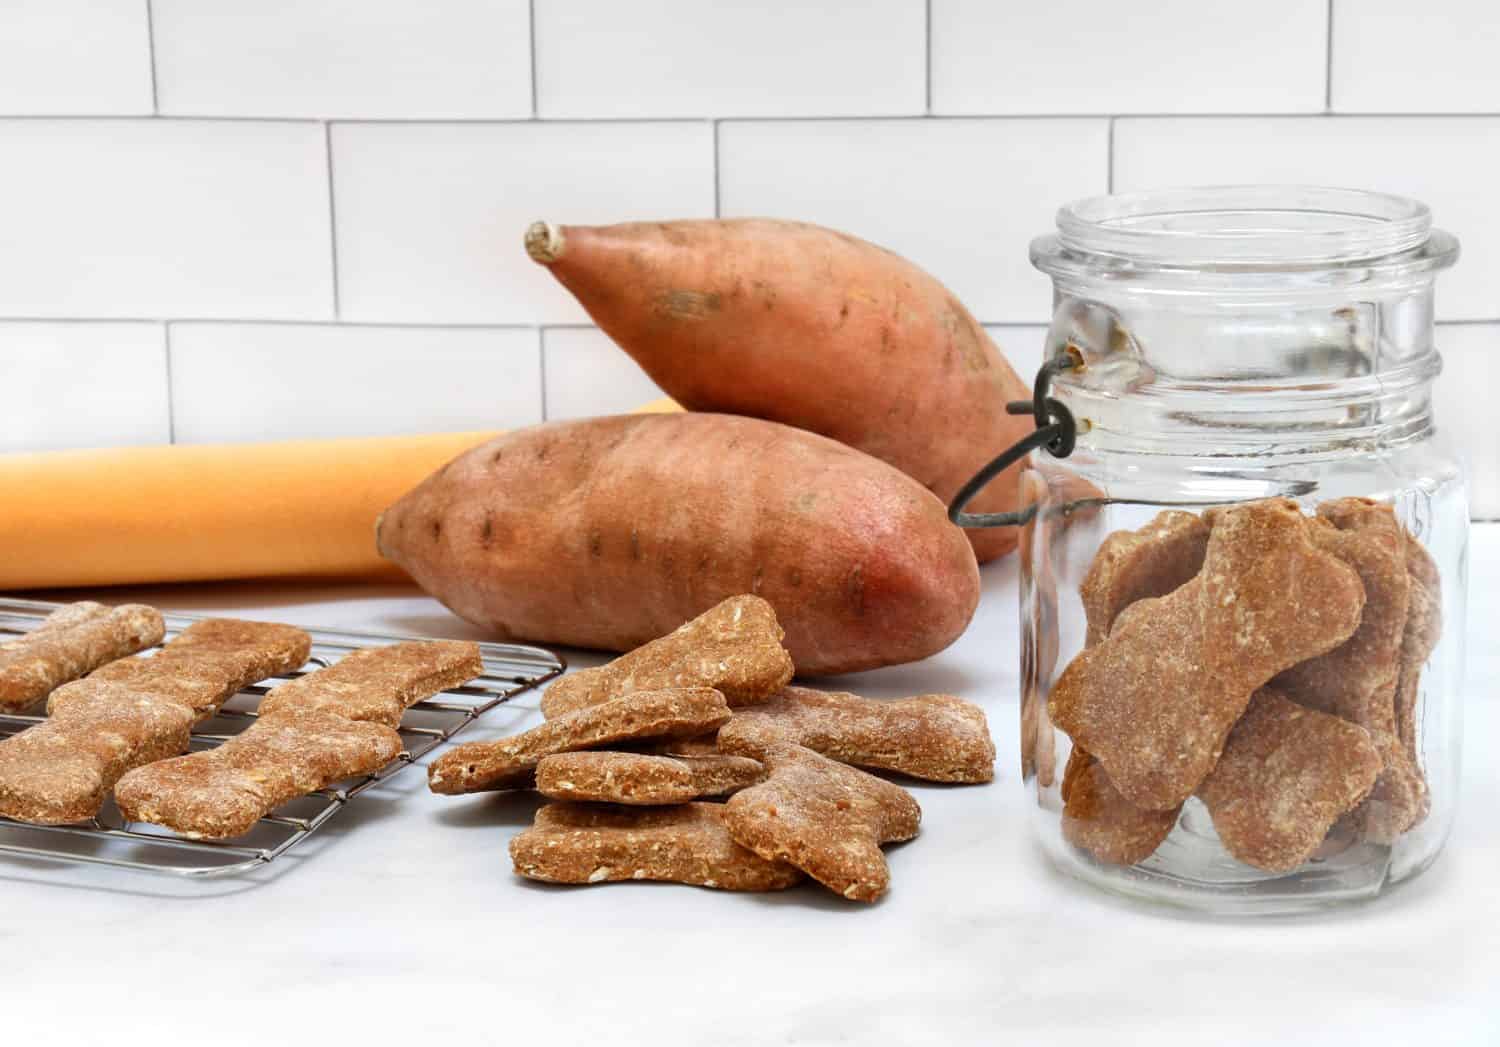 Dog cookies made from sweet potatoes on a rack, in a jar and stacked. Sweet potatoes in background.